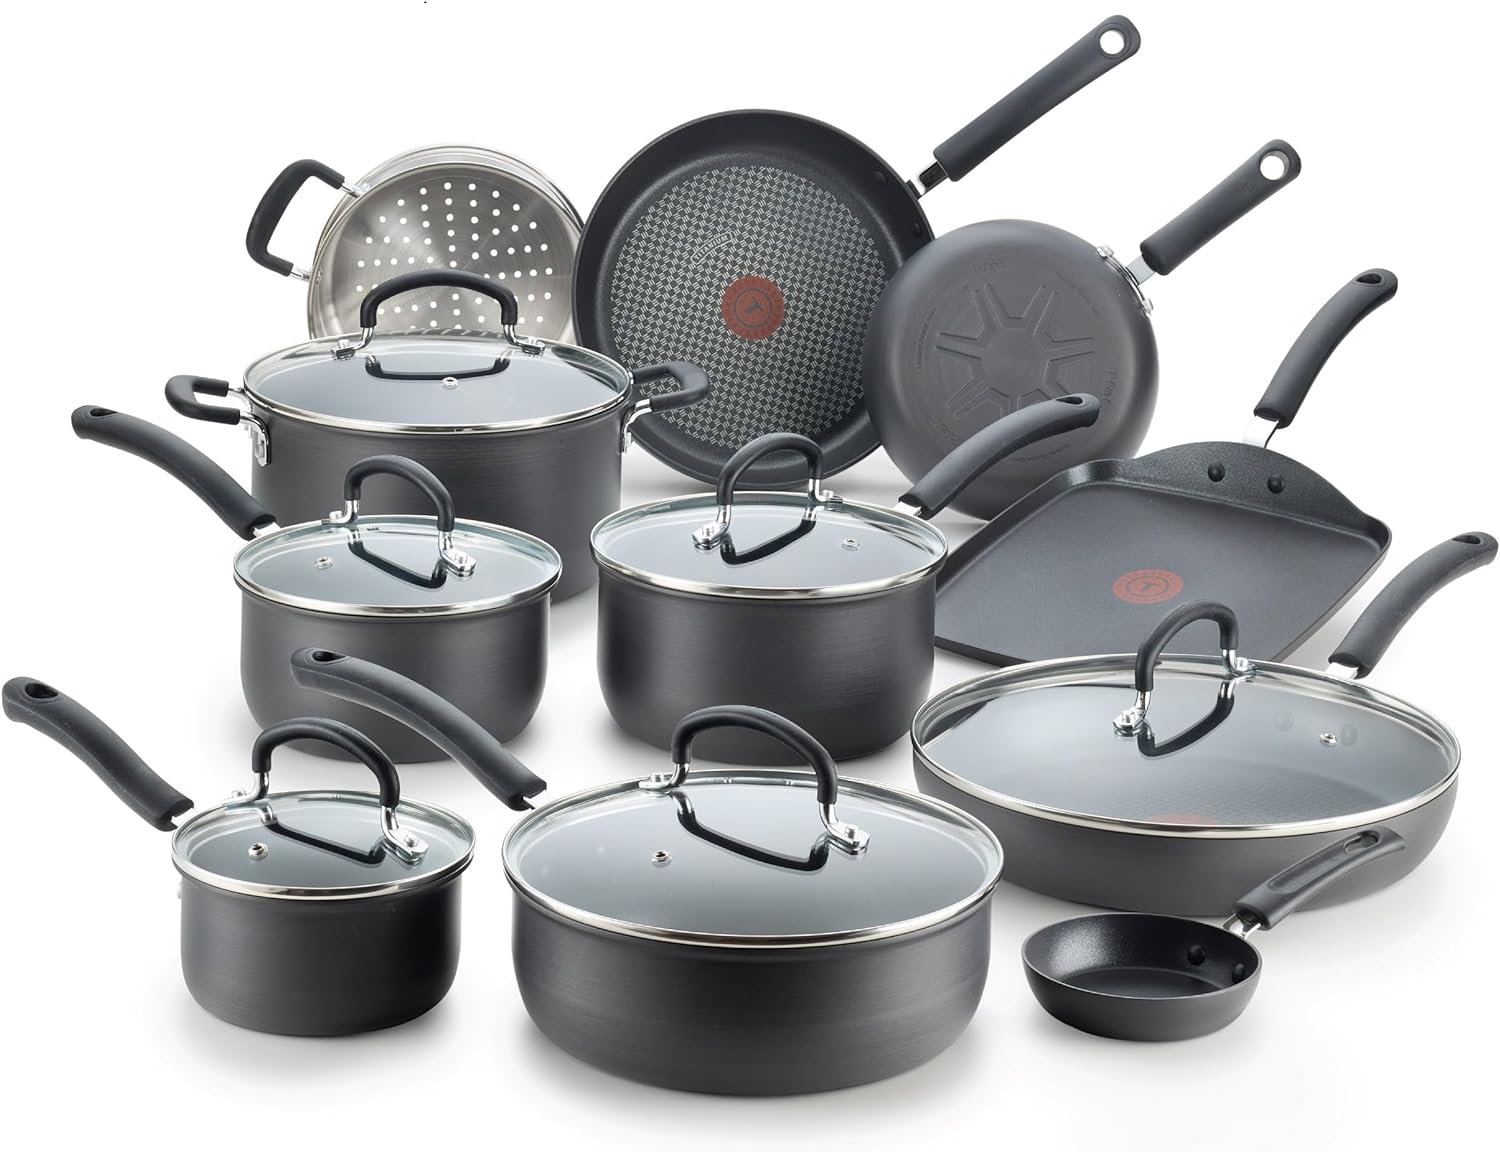 T-Fal Ultimate Hard-Anodized Nonstick 17-Piece Cookware Set